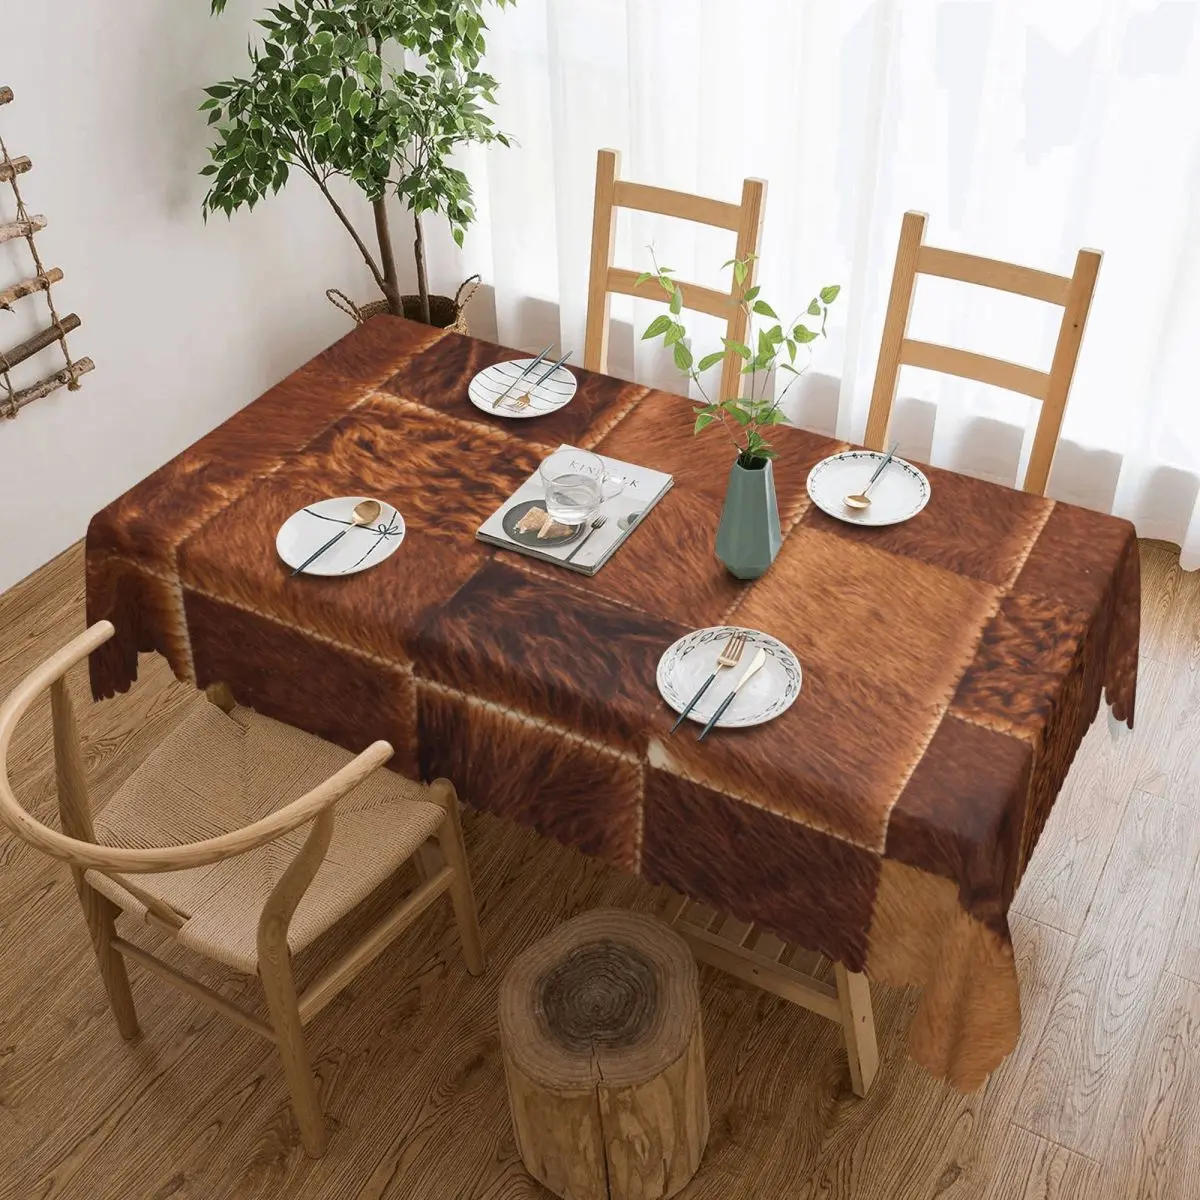 

Rectangular Oilproof Brown Checkered Cowhide Patche Table Cover Animal Fur Leather Texture Table Cloth Tablecloth for Picnic